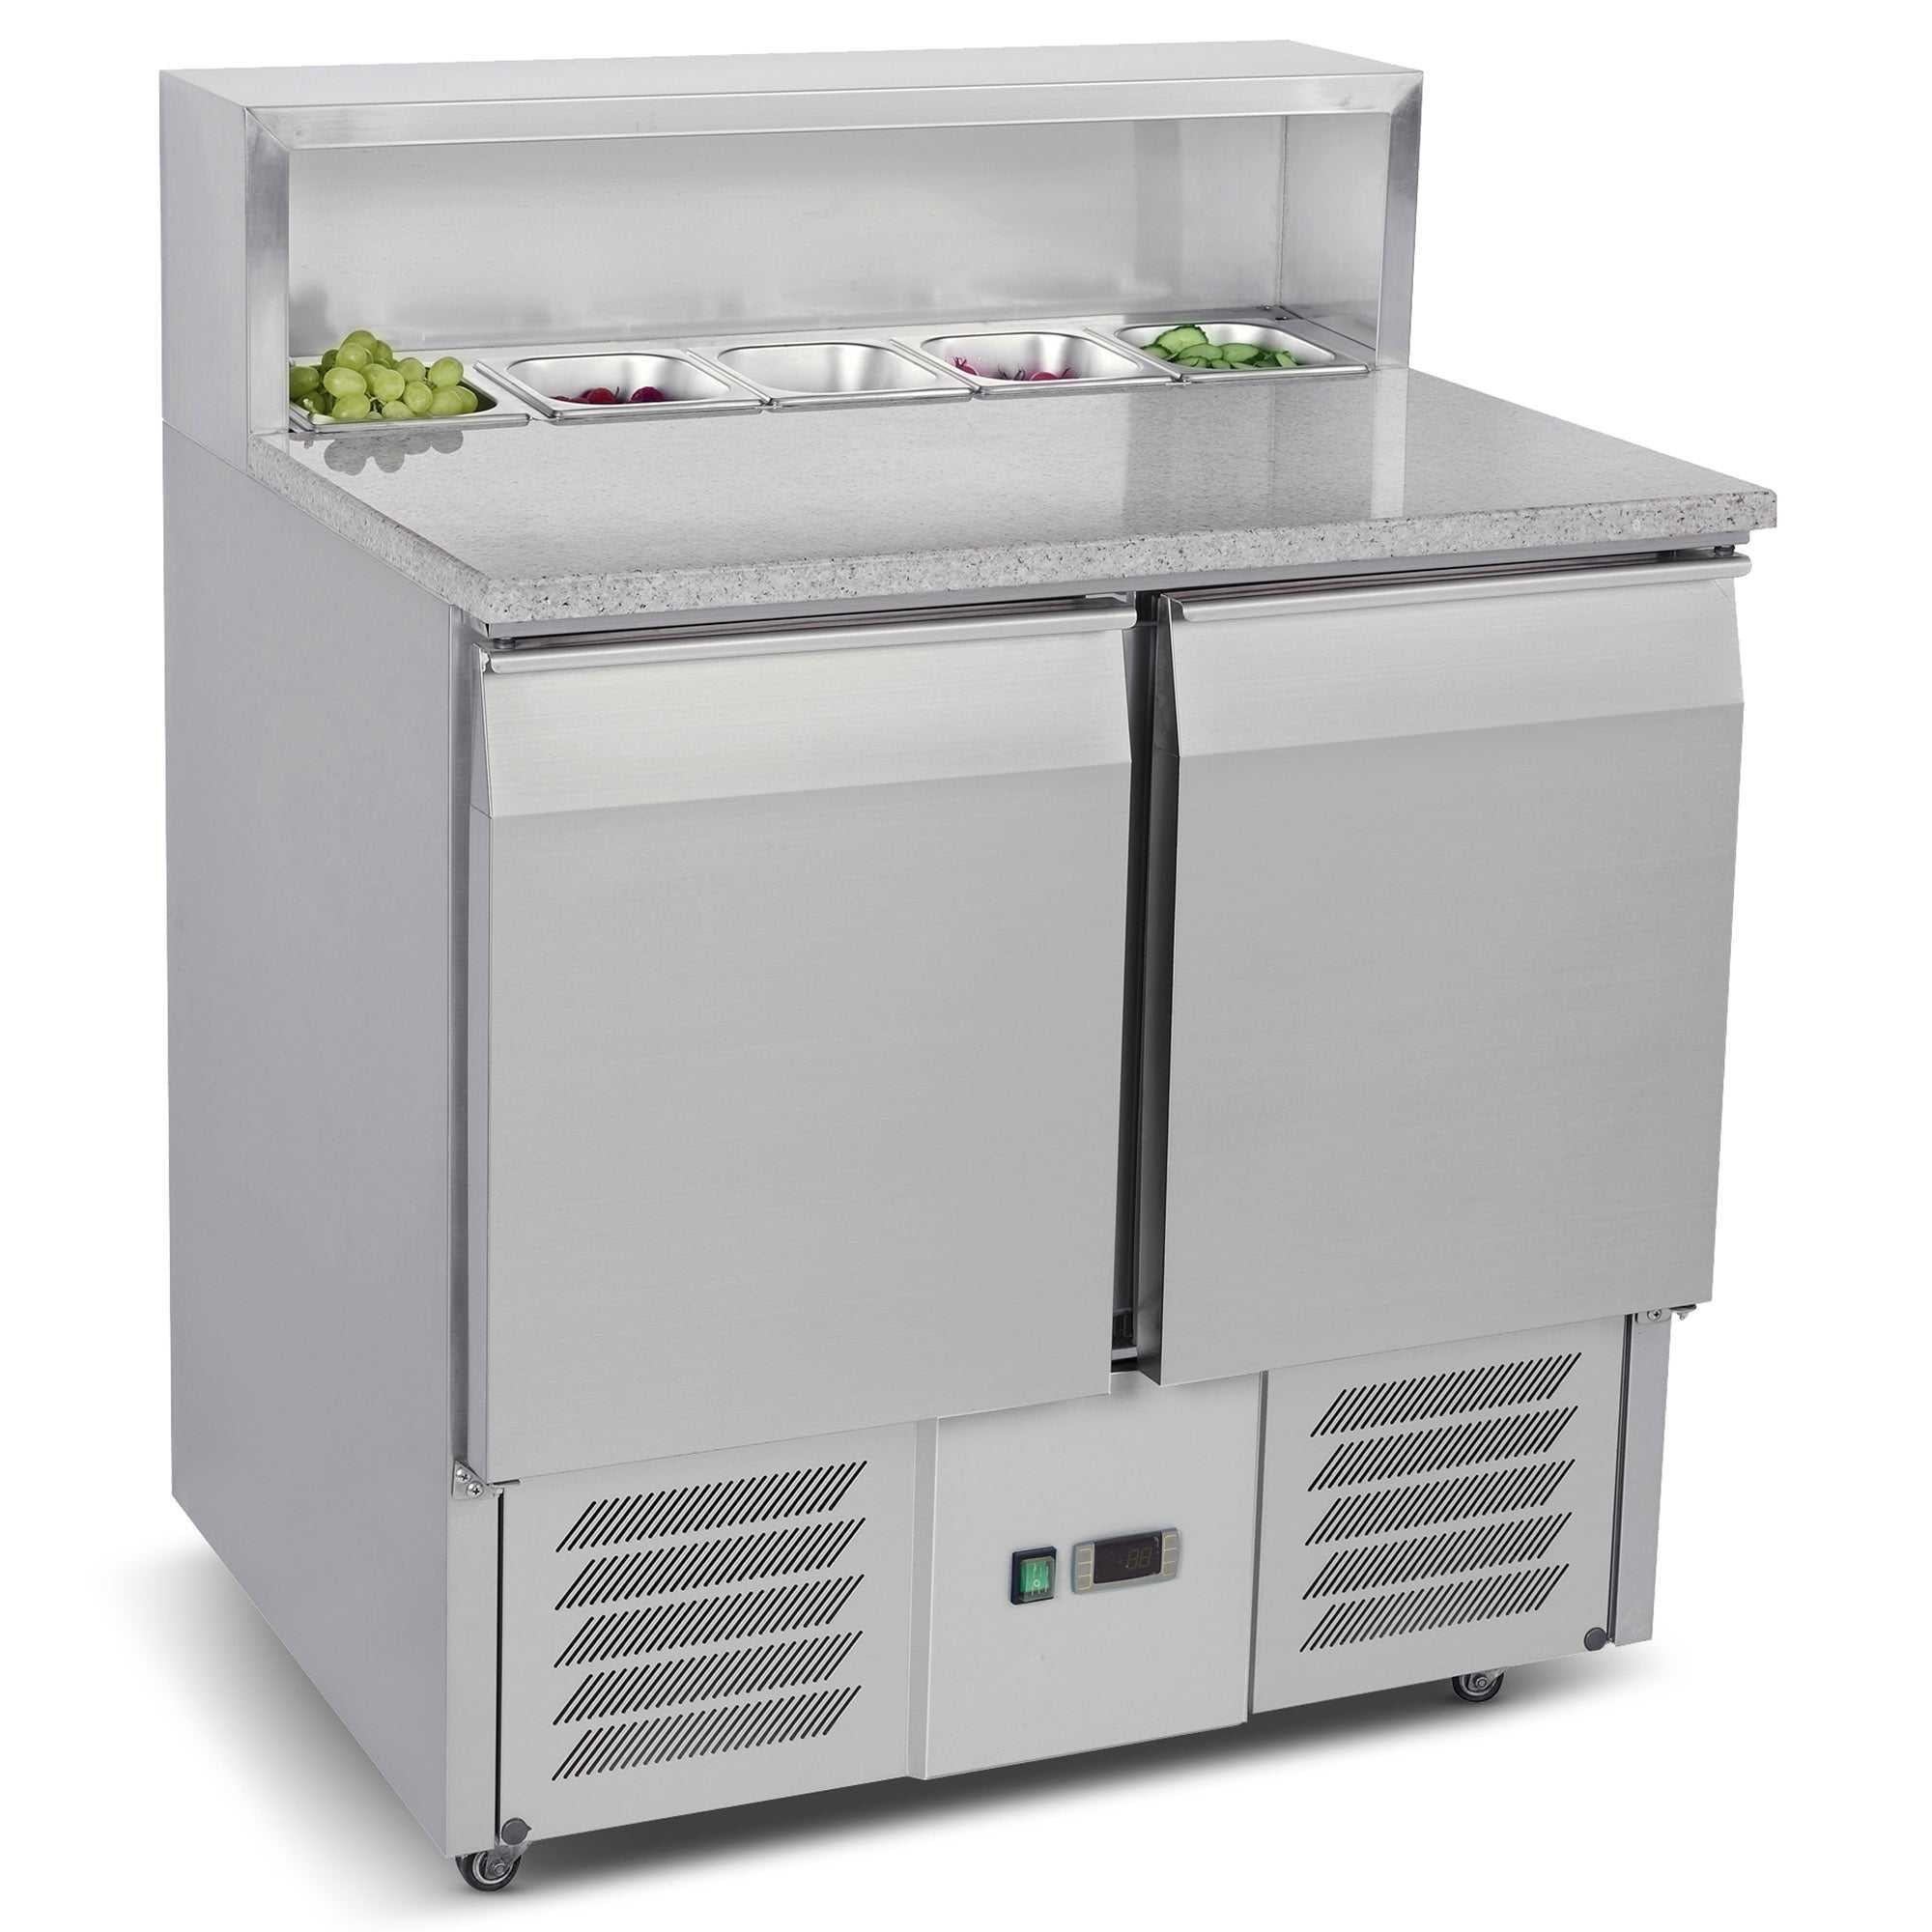 Carina Refrigerated Salad Workbench Stainless Steel Pizza and Salad Preparation Counter Commercial Display Case (PS900)